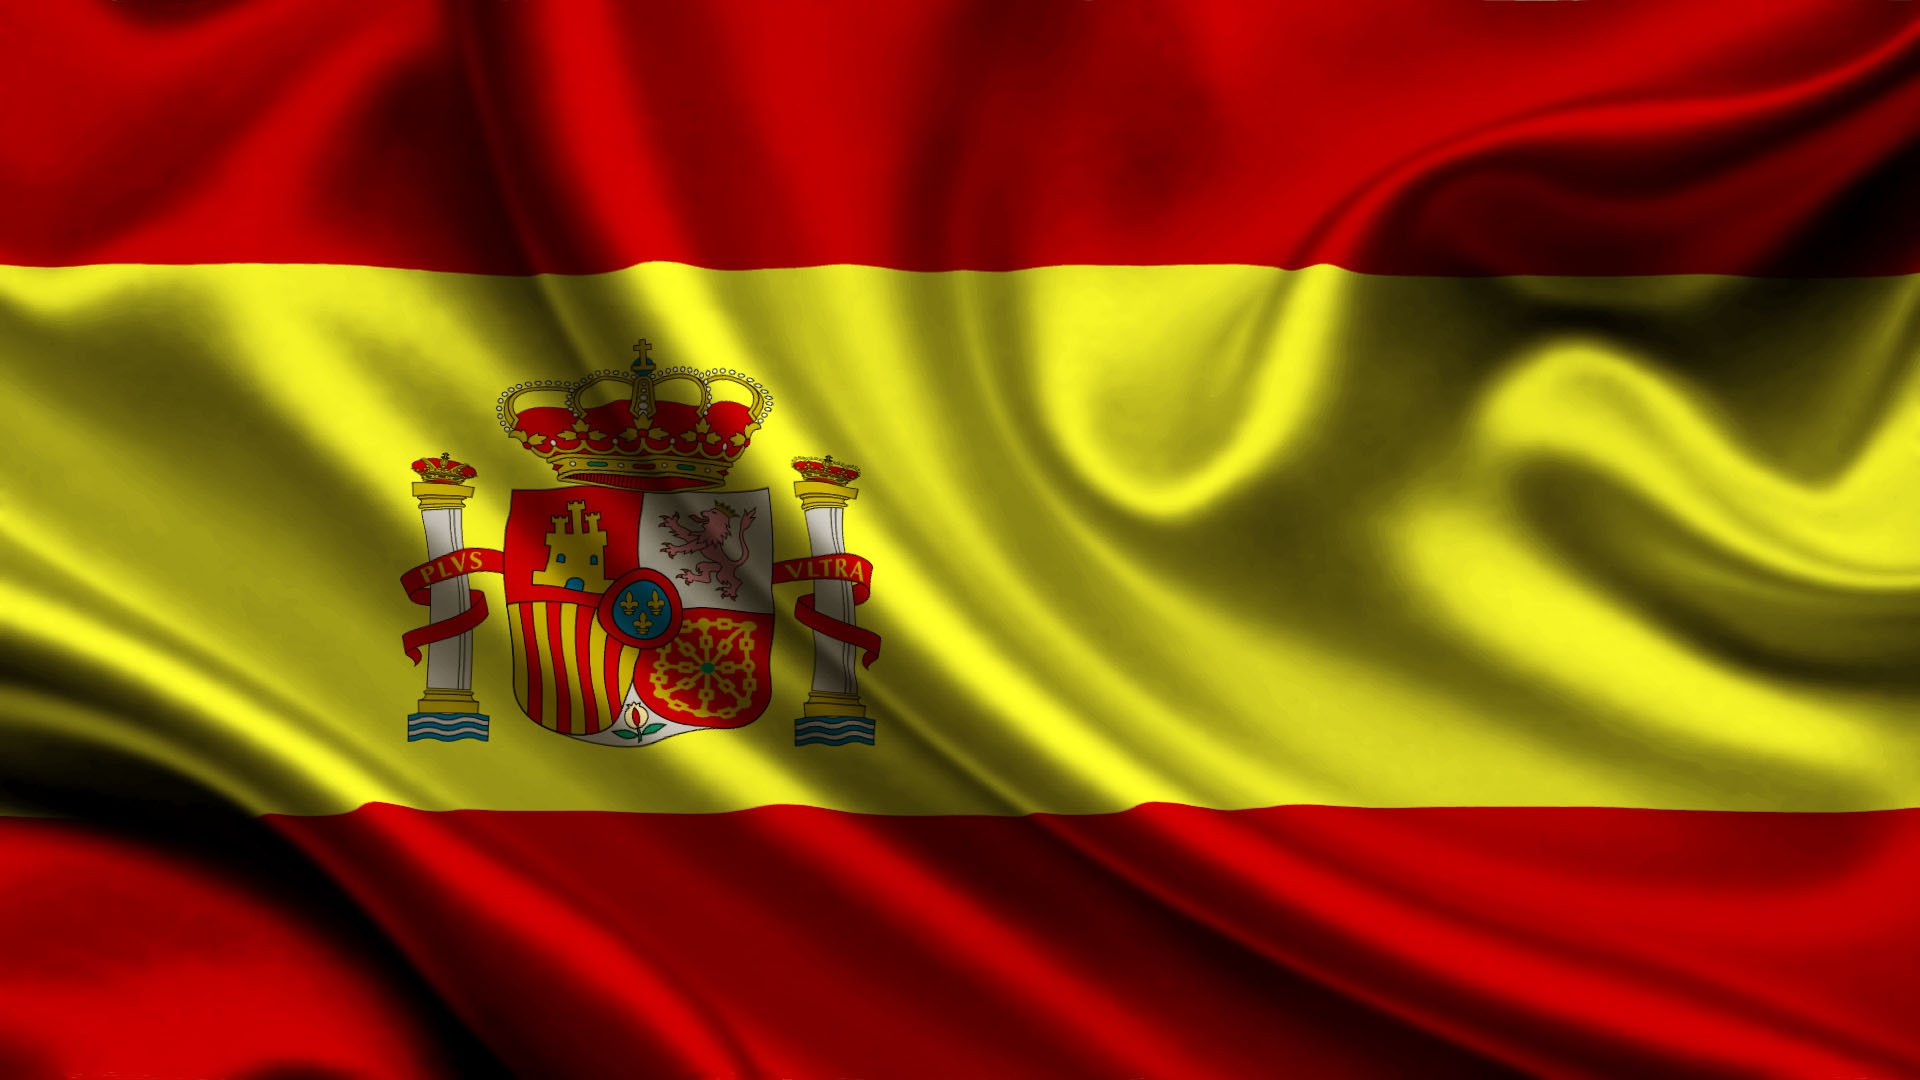 General 1920x1080 flag Spain red yellow